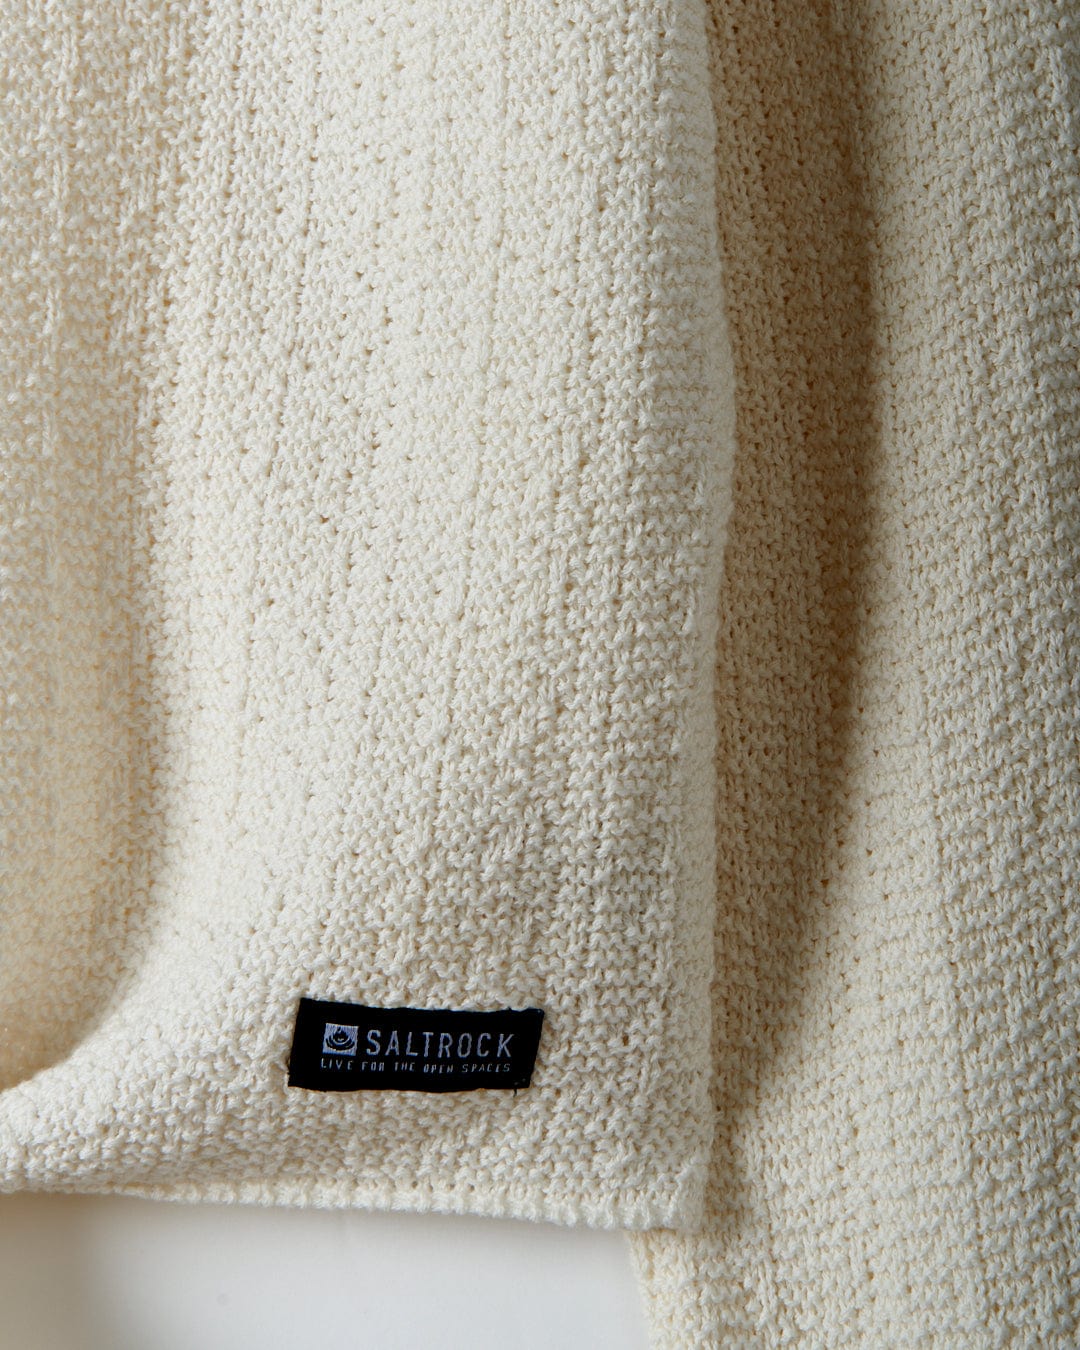 Close-up of a textured knit white towel with a black "Saltrock" label attached.